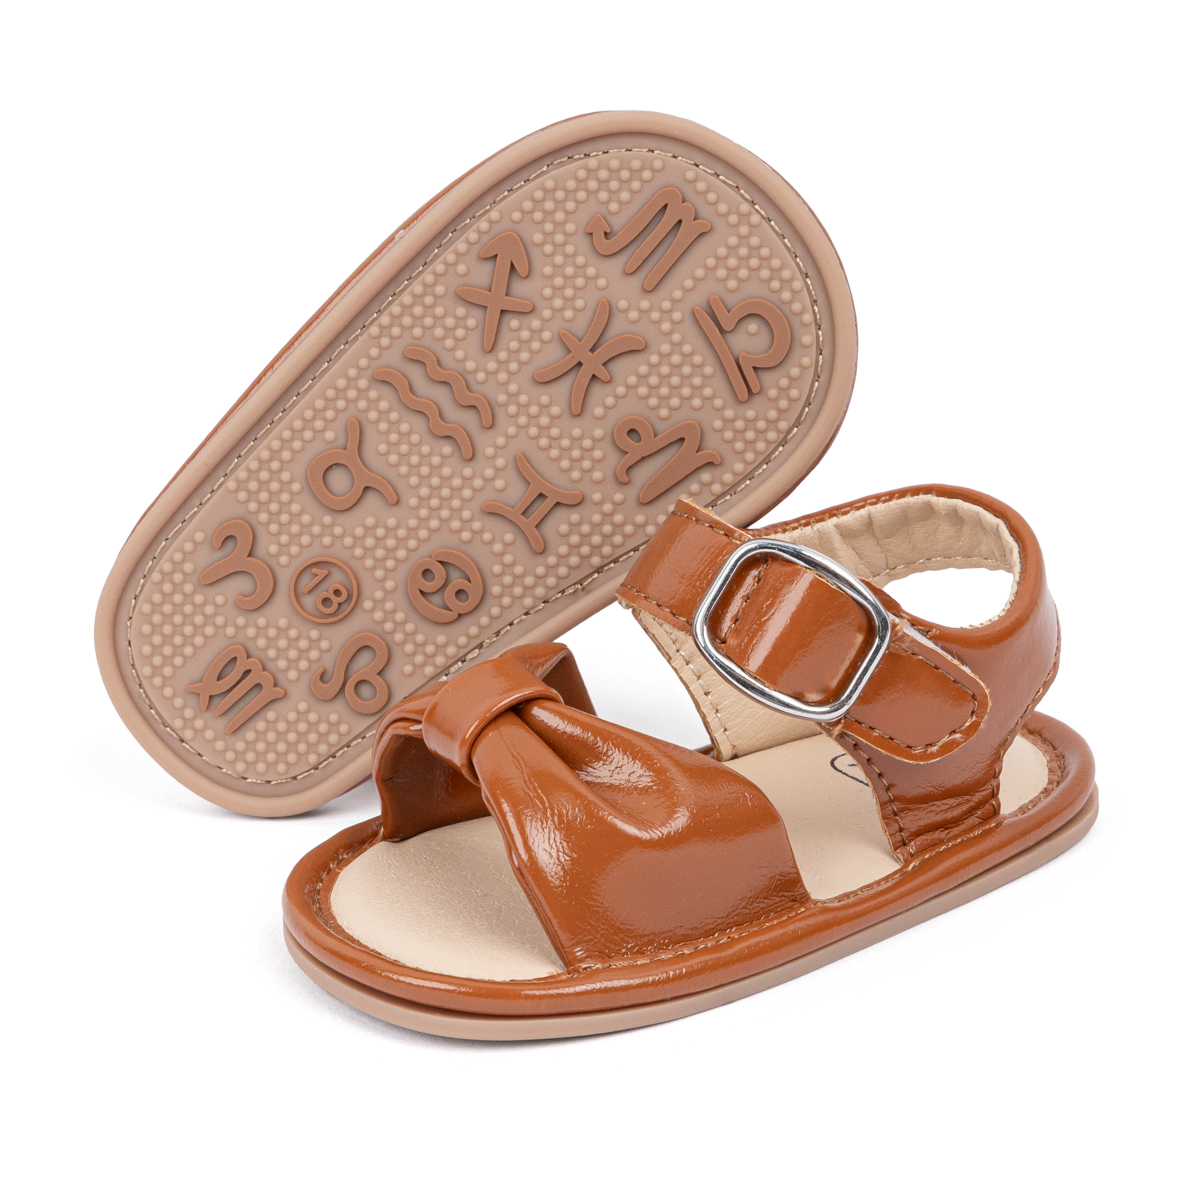 PU Leather Twisted Bow Summer Baby Sandals